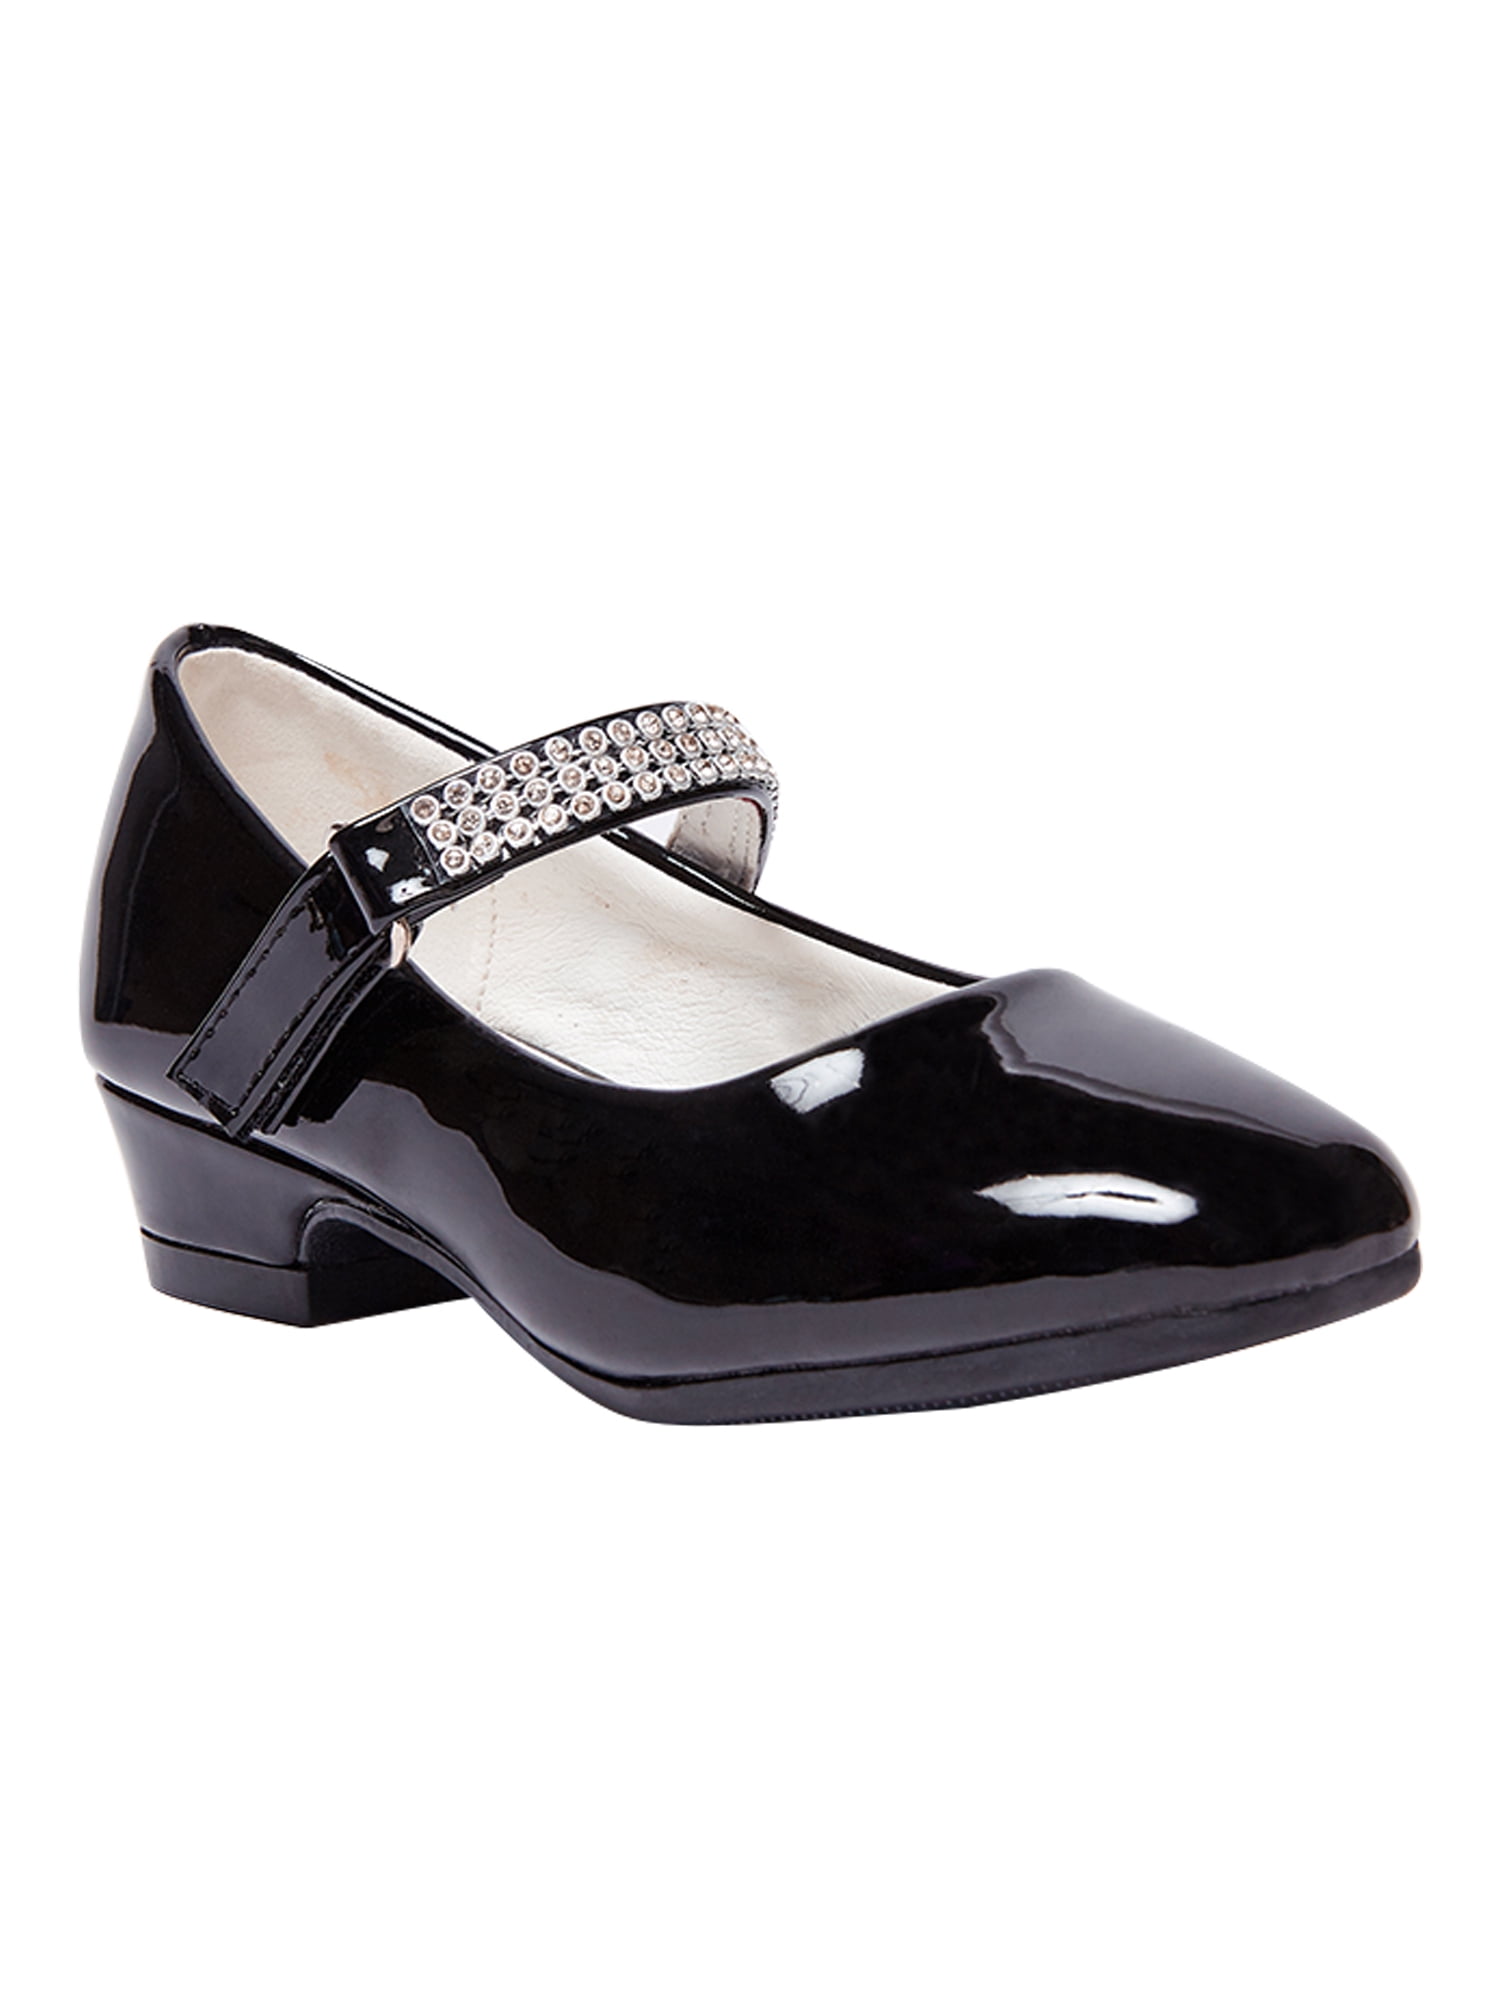 Stelle Now Mary Jane Shoes Dress Shoes for Girls/Toddlers - Walmart.com